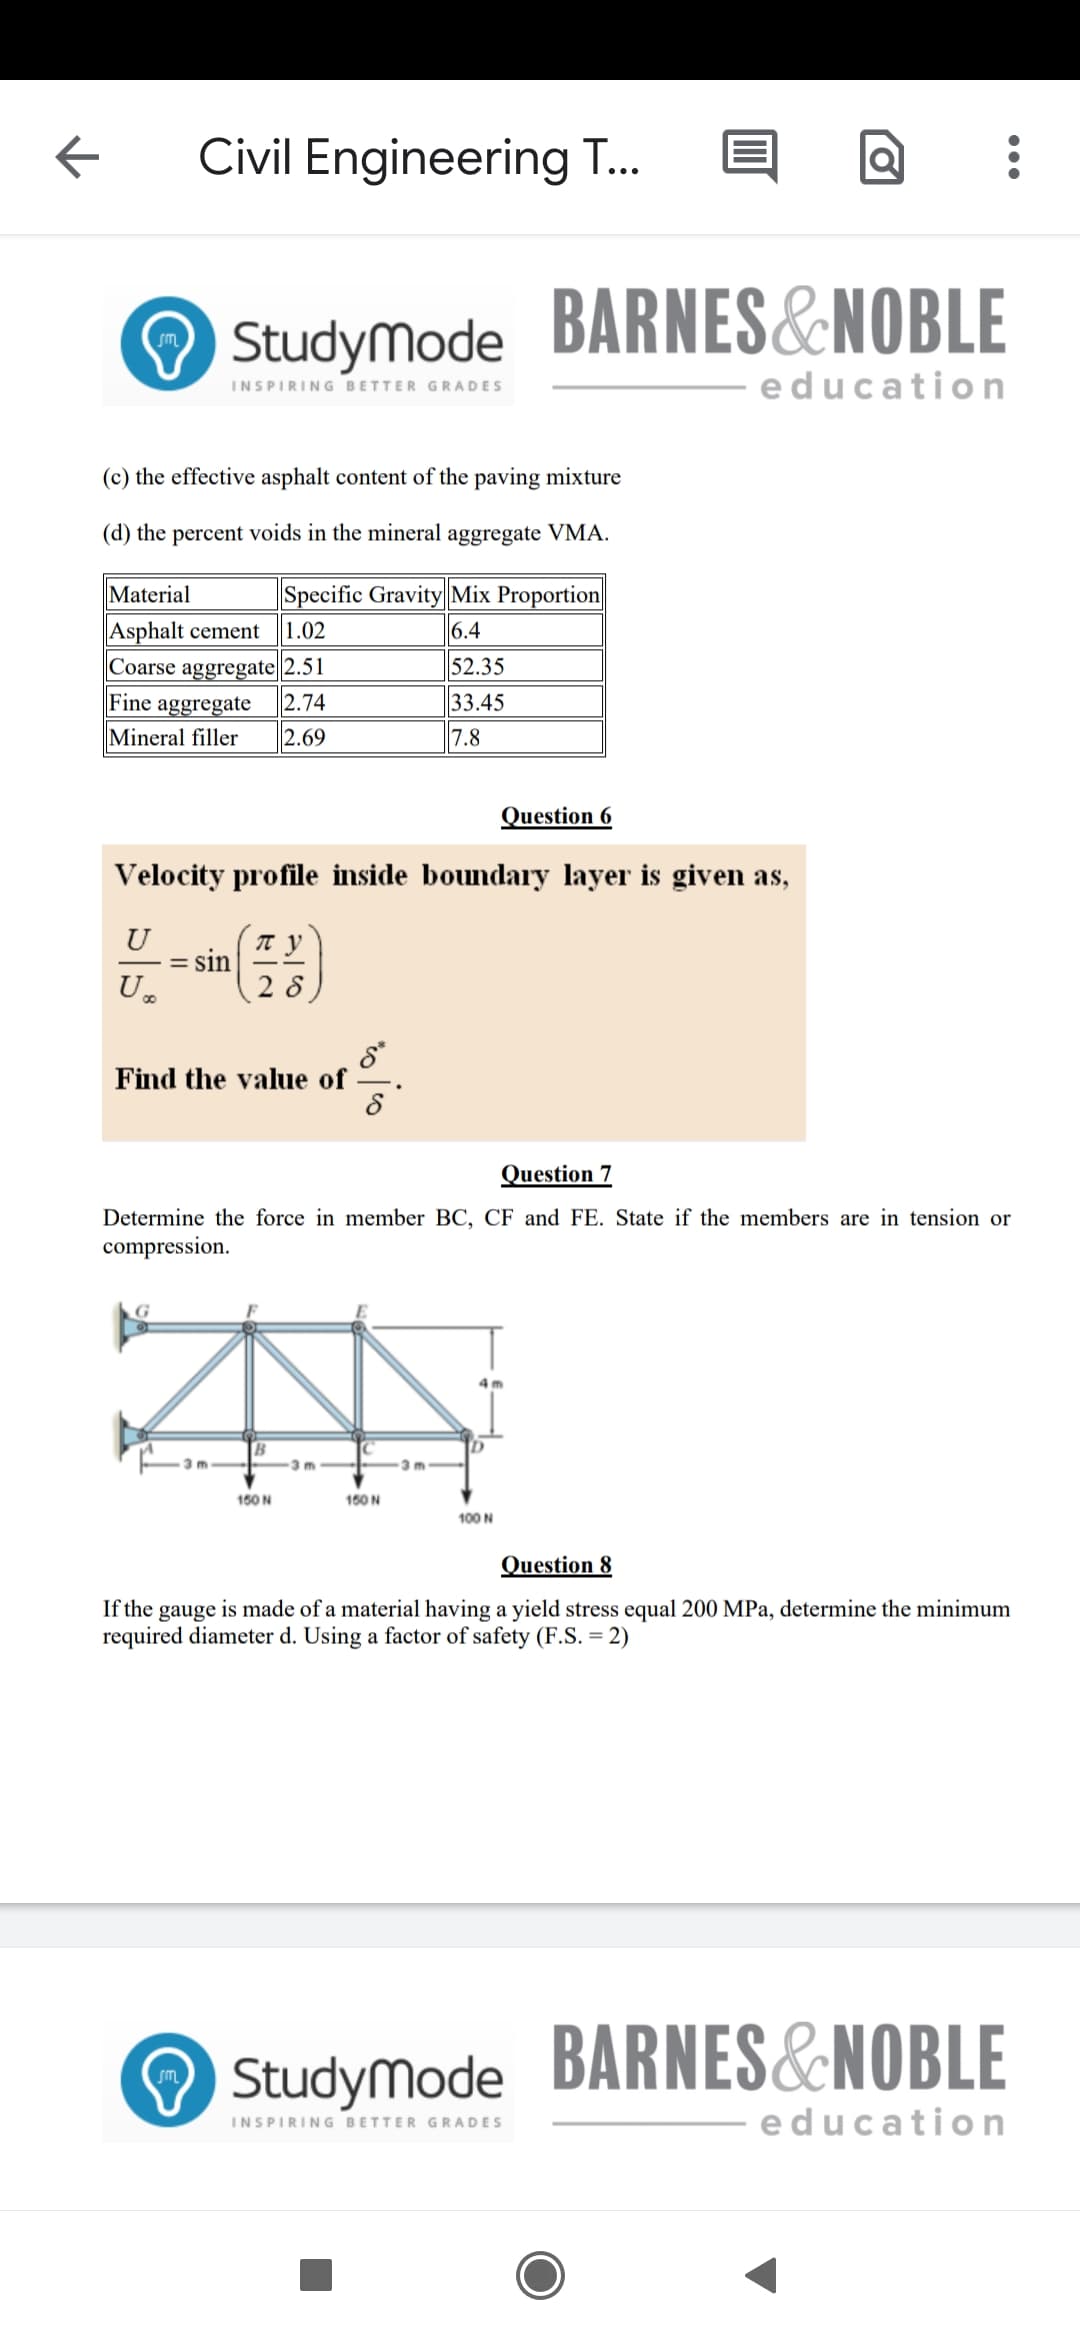 Question 6
Velocity profile inside boundary layer is given as,
U
sin
U.
2 8
Find the value of
